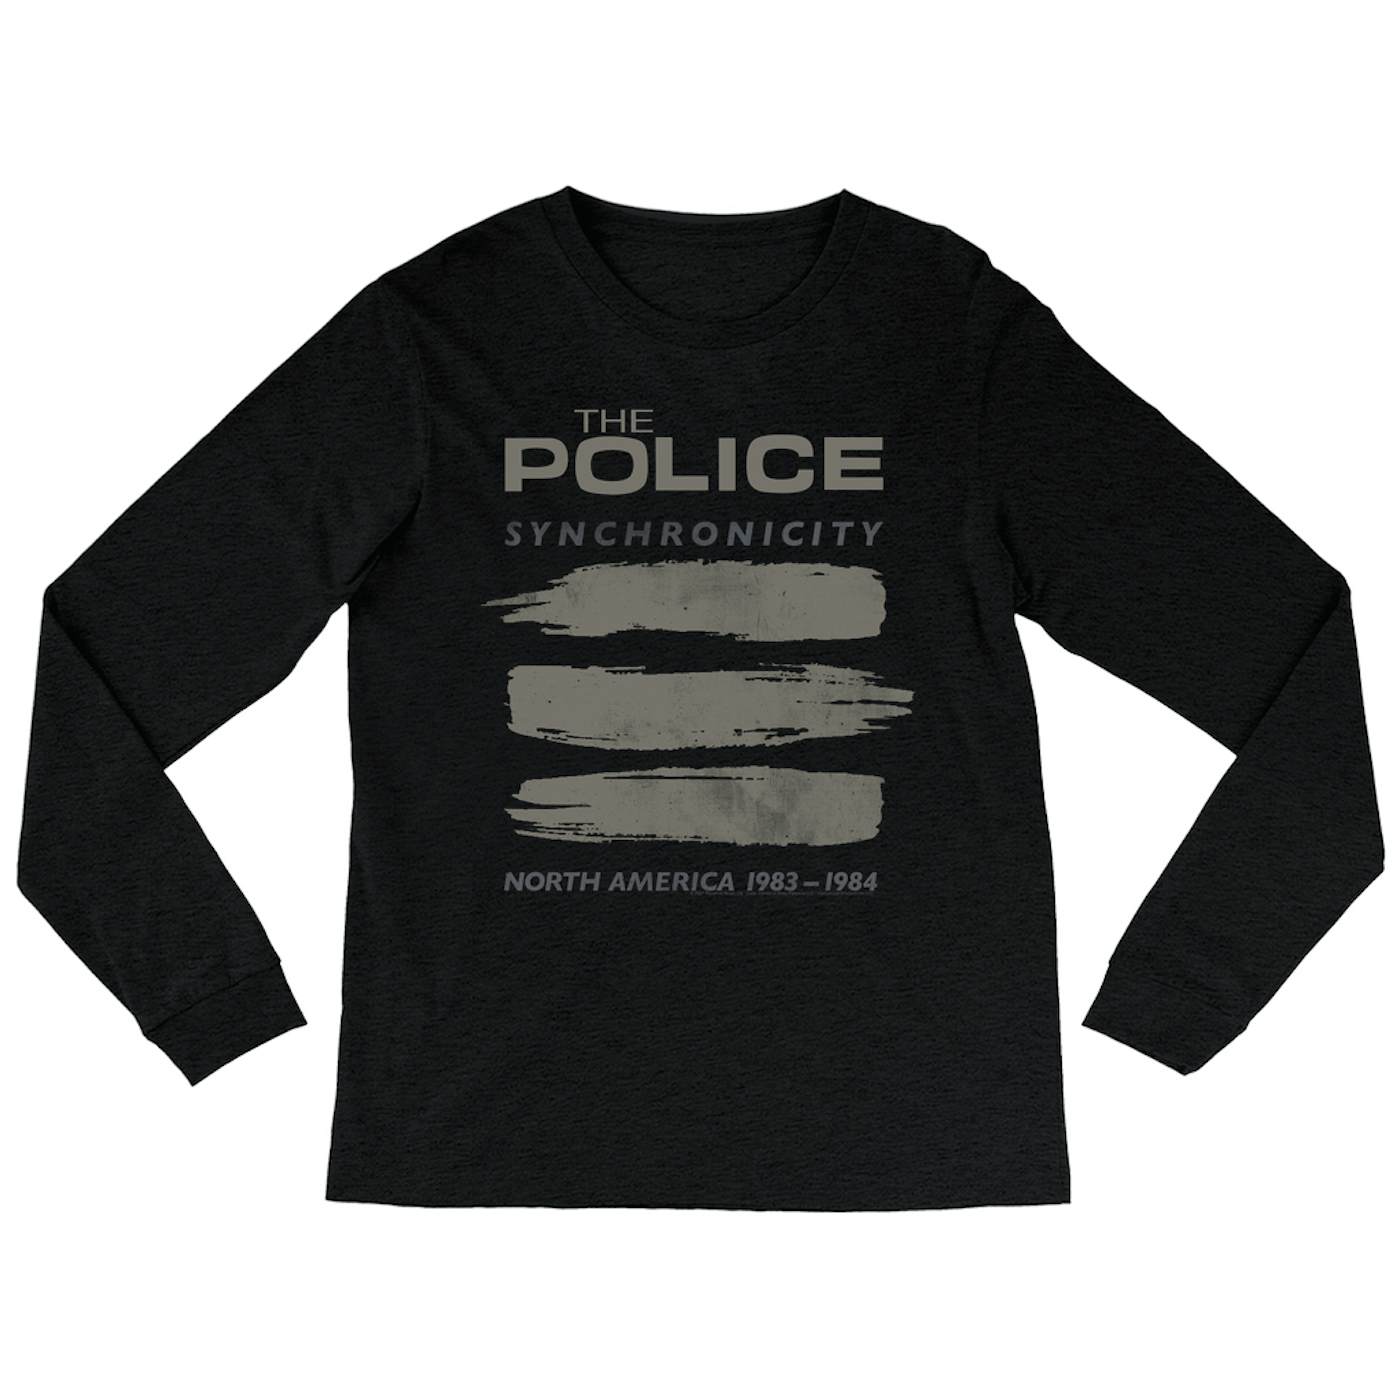 The Police Heather Long Sleeve Shirt | Synchronicity North America Tour 1983 - 1984 The Police Shirt